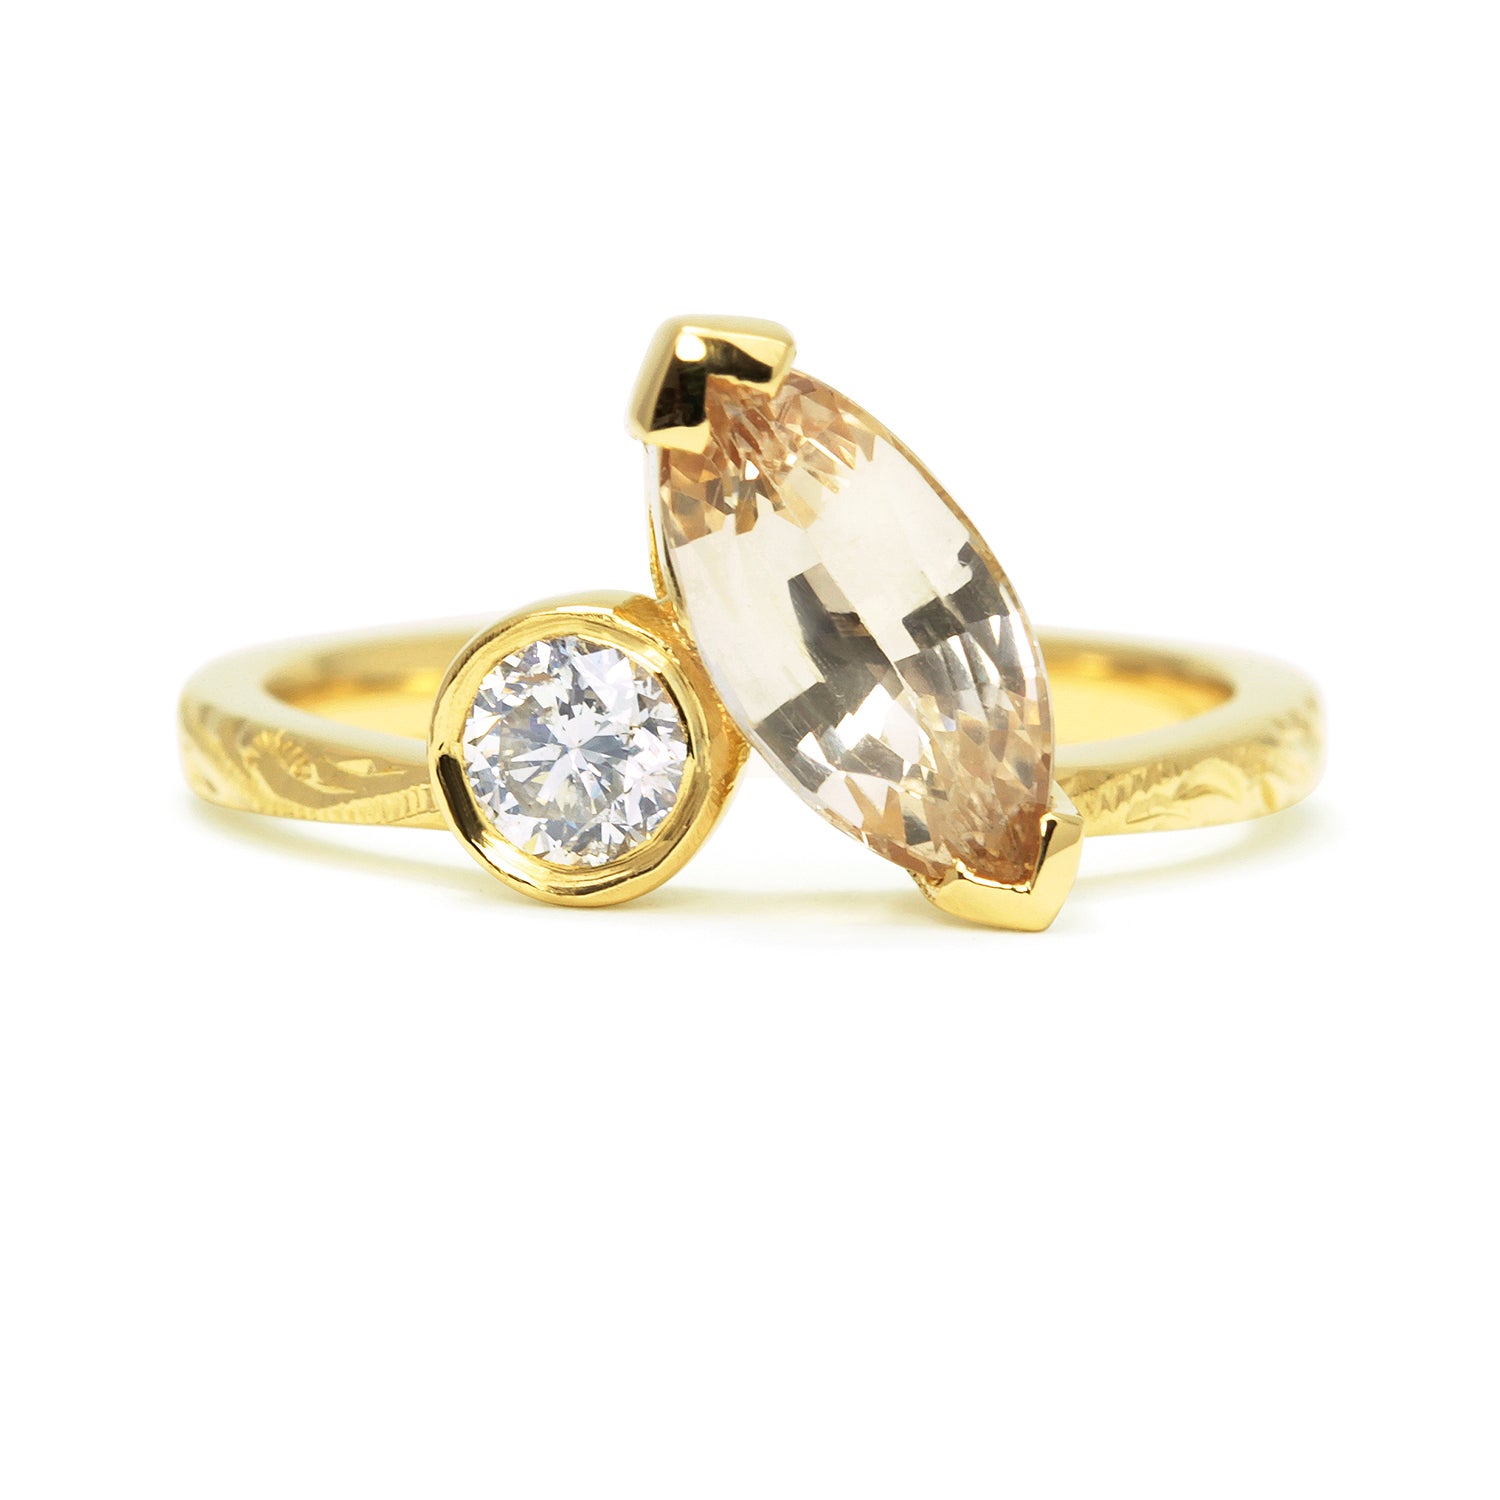 Bespoke Matt toi et moi engagement ring, champagne Sri Lankan marquise sapphire, recycled brilliant-cut diamond and 18ct yellow Fairtrade Gold